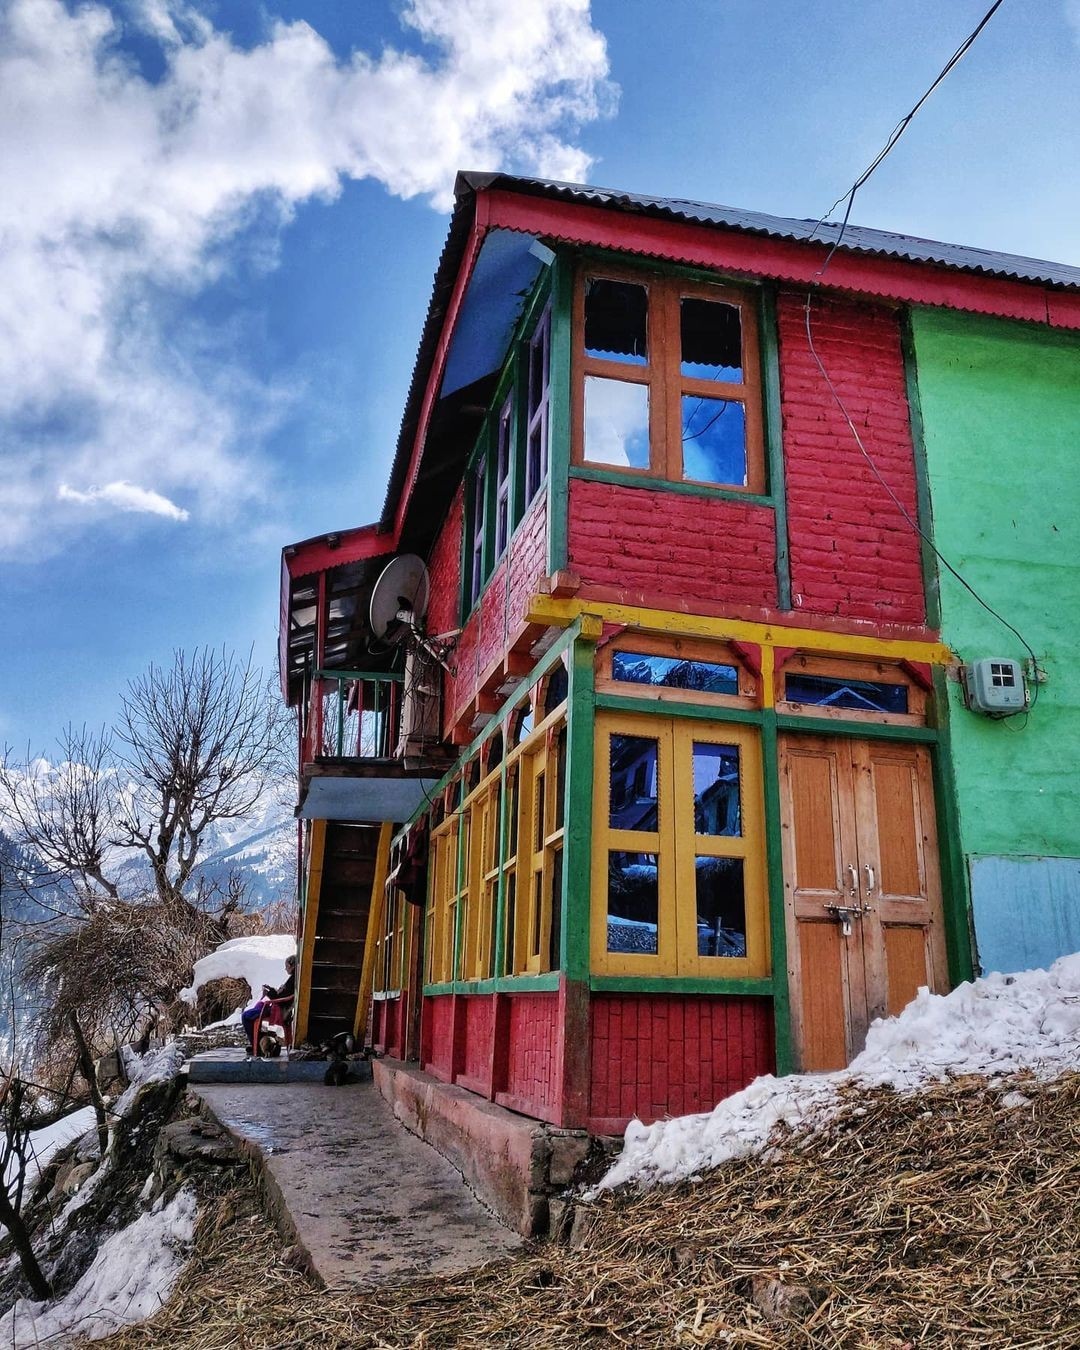 When such amazing traditional houses in Himachal inspires you to keep travelling to this beautiful state.📸 - @boundlessdesires #himachal #travel #veenaworld